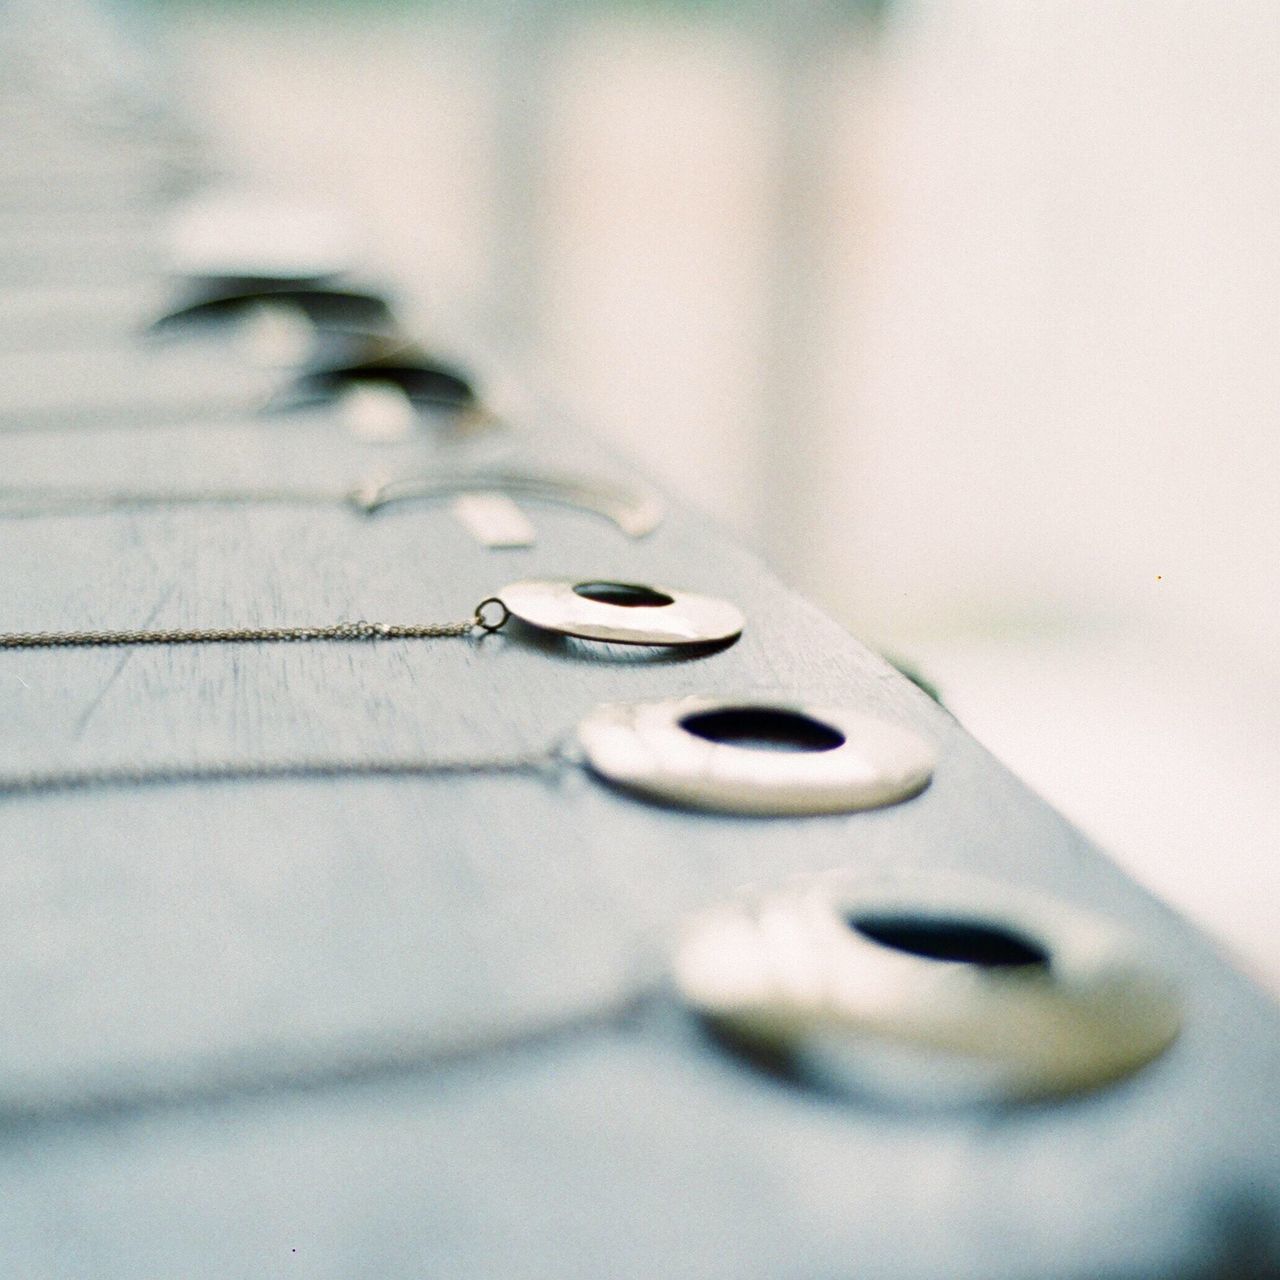 selective focus, indoors, close-up, metal, no people, music, musical instrument string, day